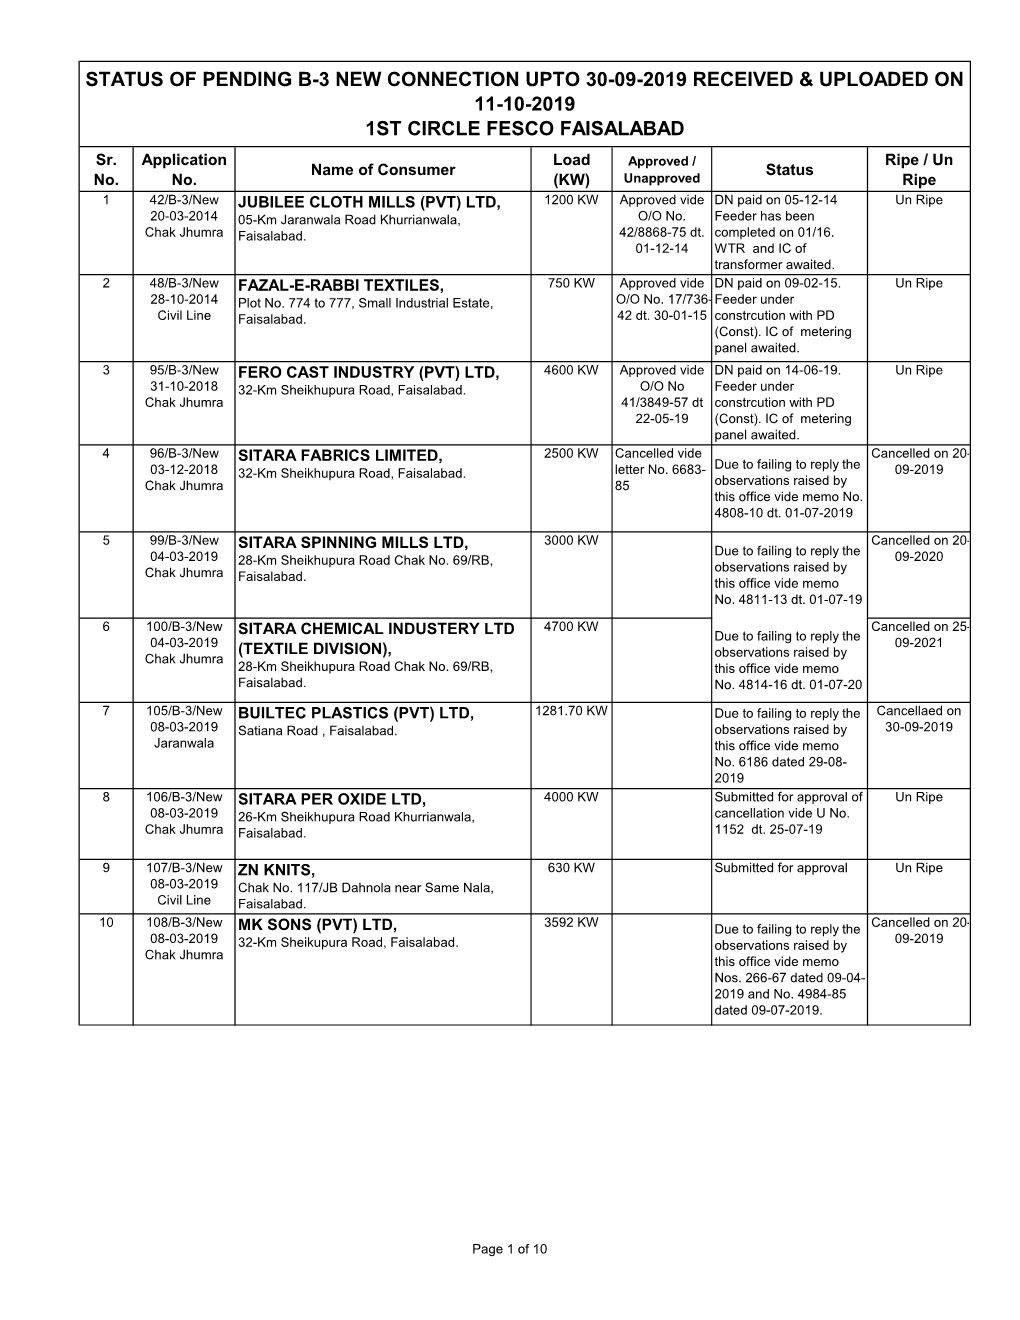 Status of Pending B-3 New Connection Upto 30-09-2019 Received & Uploaded on 11-10-2019 1St Circle Fesco Faisalabad